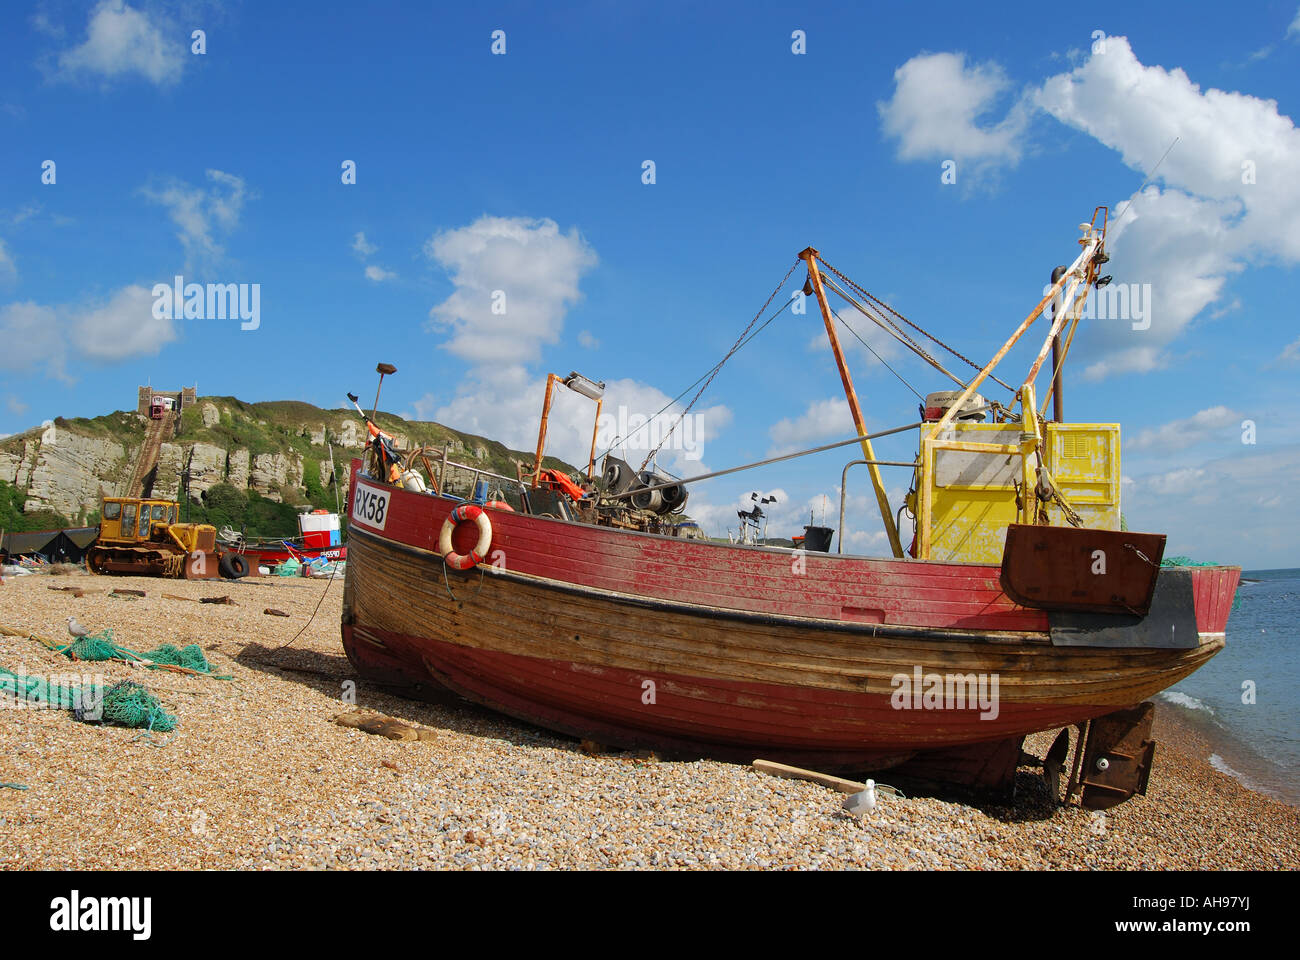 Fishing boat and nets on beach, The Stade, Hastings Old Town, Hastings, East Sussex, England, United Kingdom Stock Photo